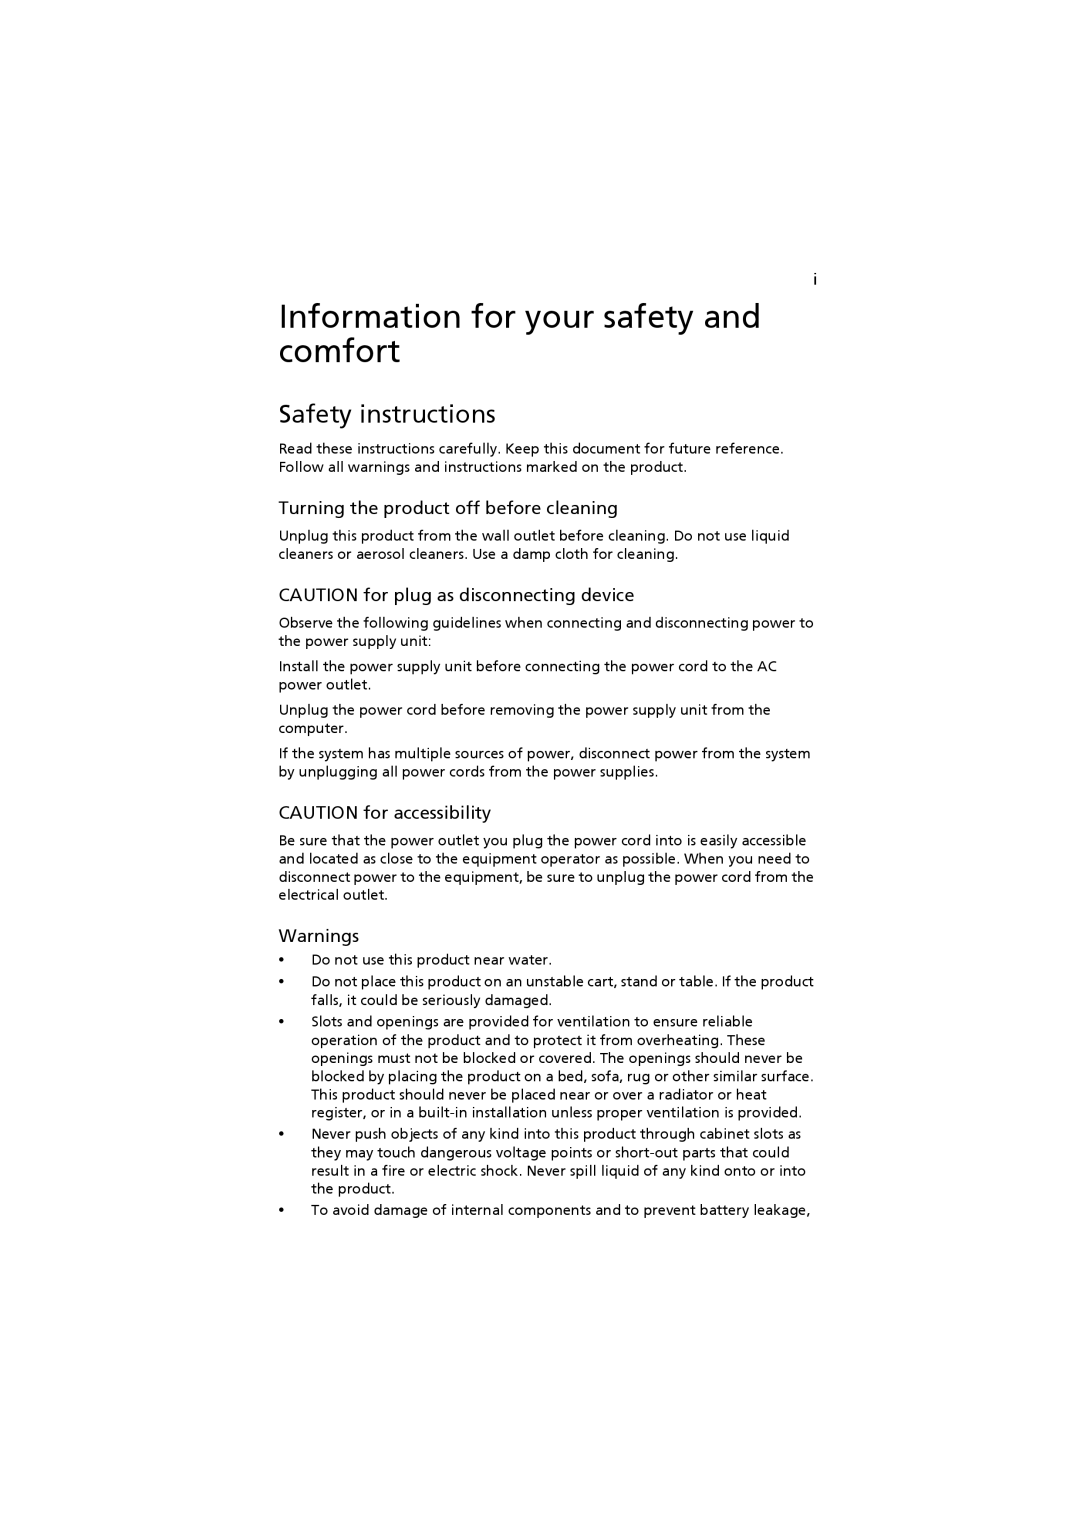 Acer X1300 Information for your safety and comfort, Safety instructions, Turning the product off before cleaning, Warnings 